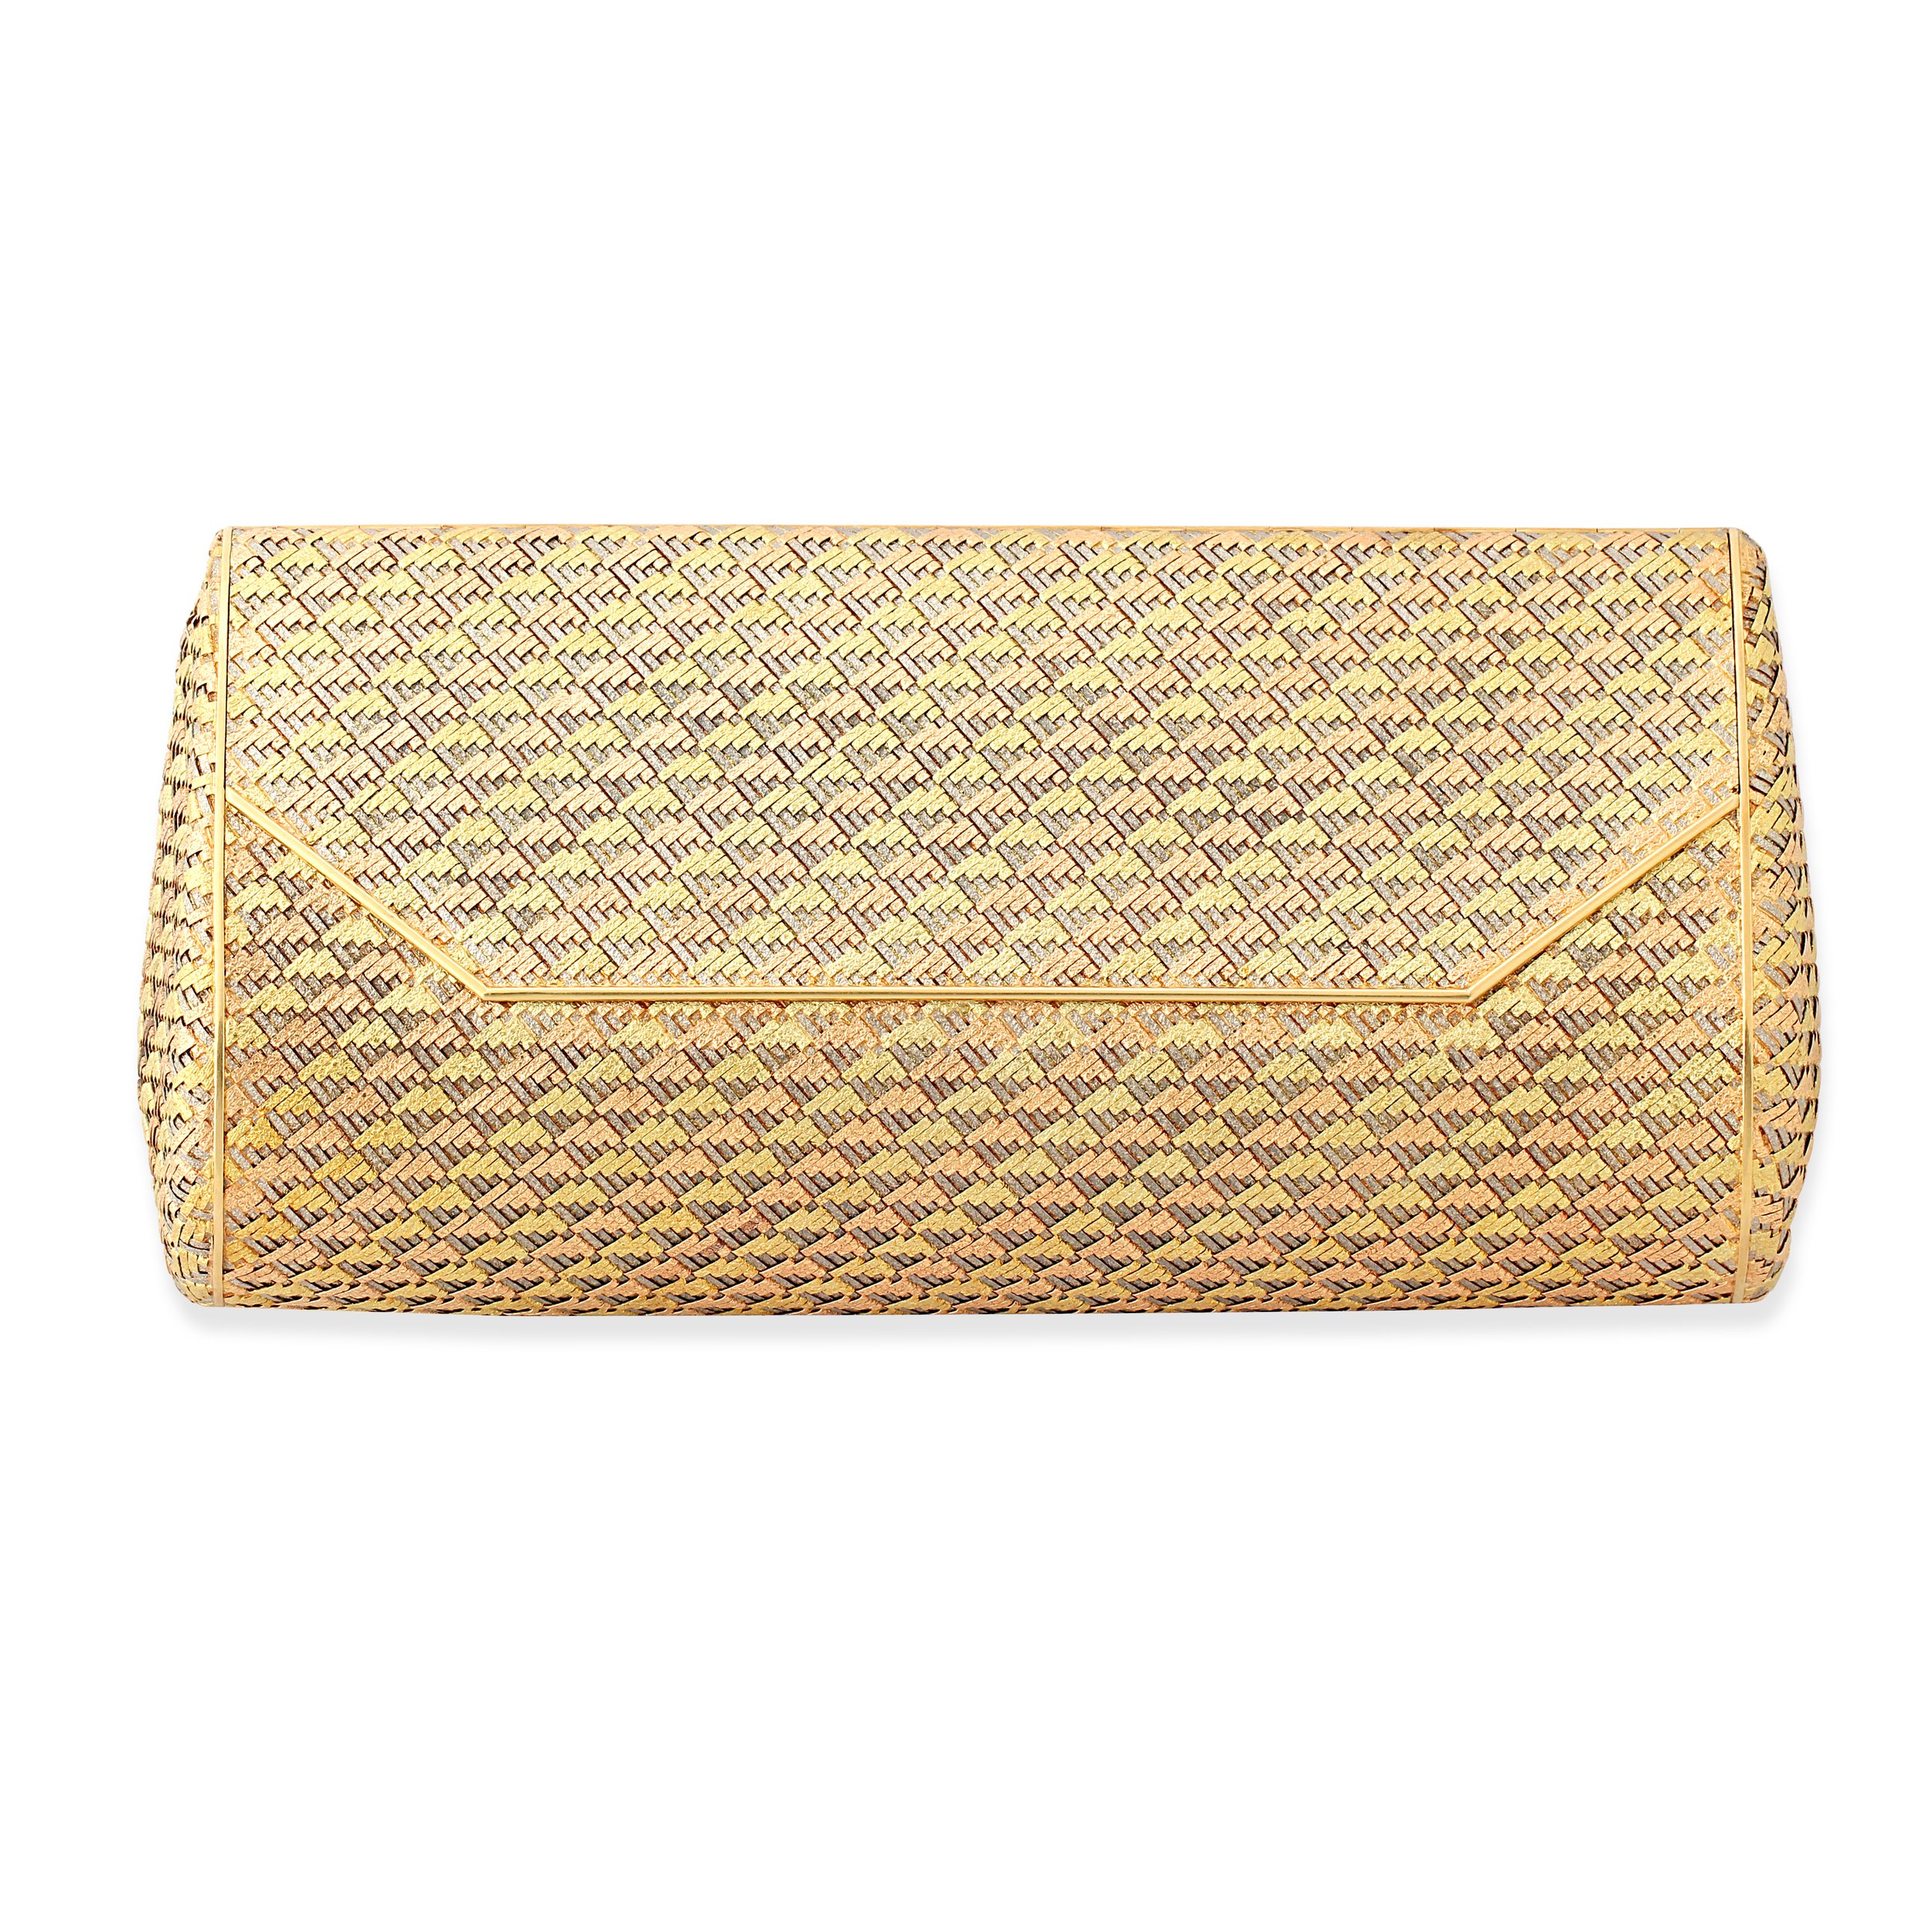 Everbest® | Woman's evening bag wedding handbag artificial gold purse |  Crystal evening ethnic clutch bag | Wedding party bridal sling hand bag for  woman and girl's : Amazon.in: Fashion